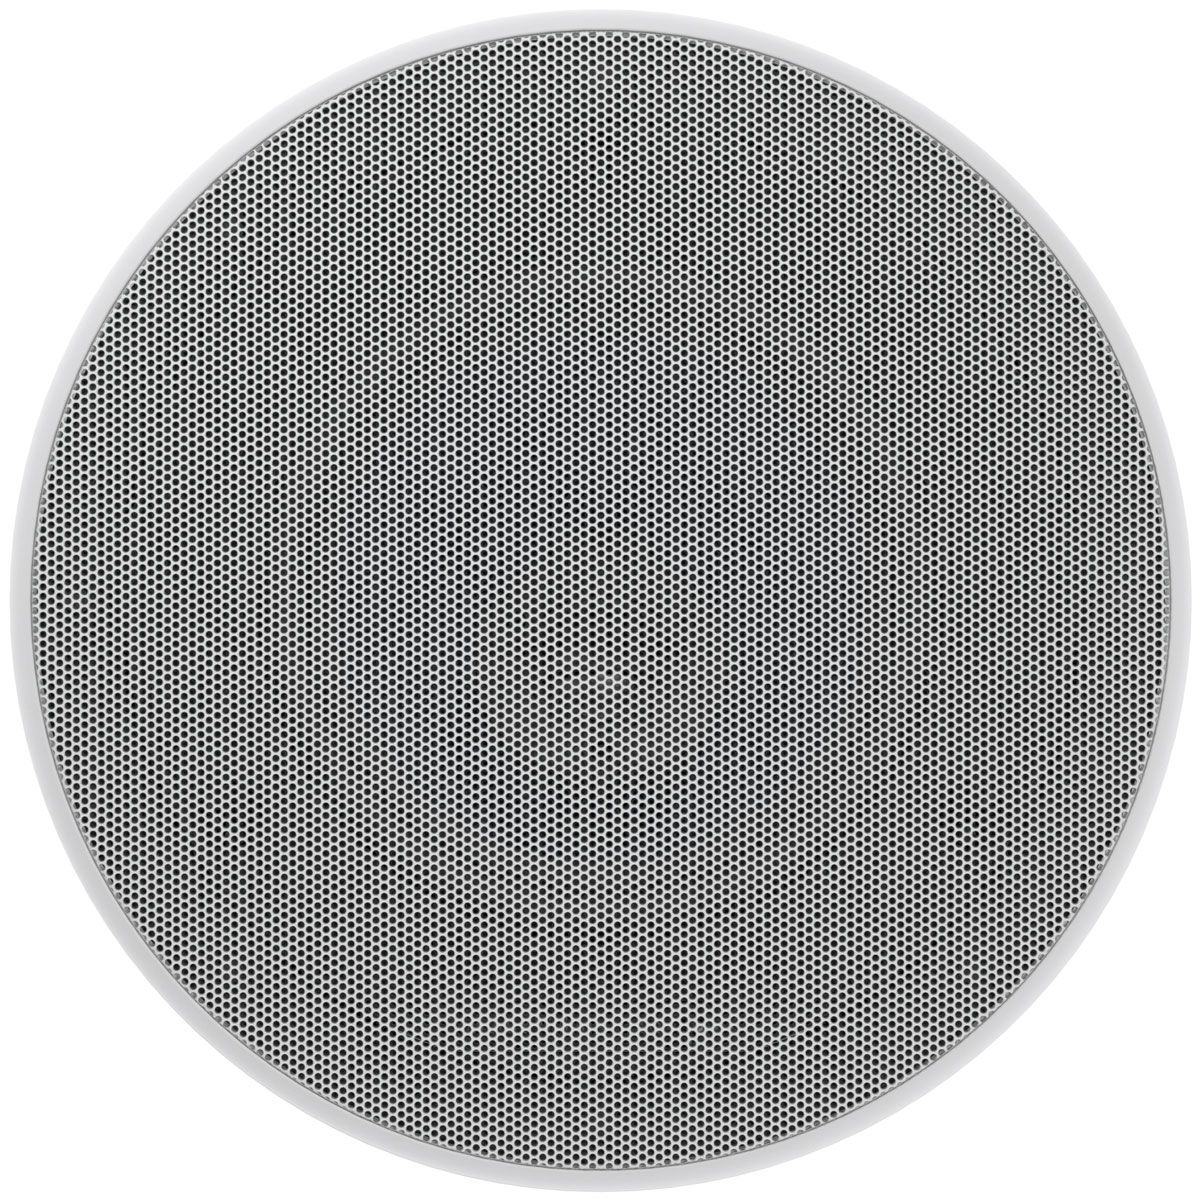 B&W CCM664 Speaker with Grille On